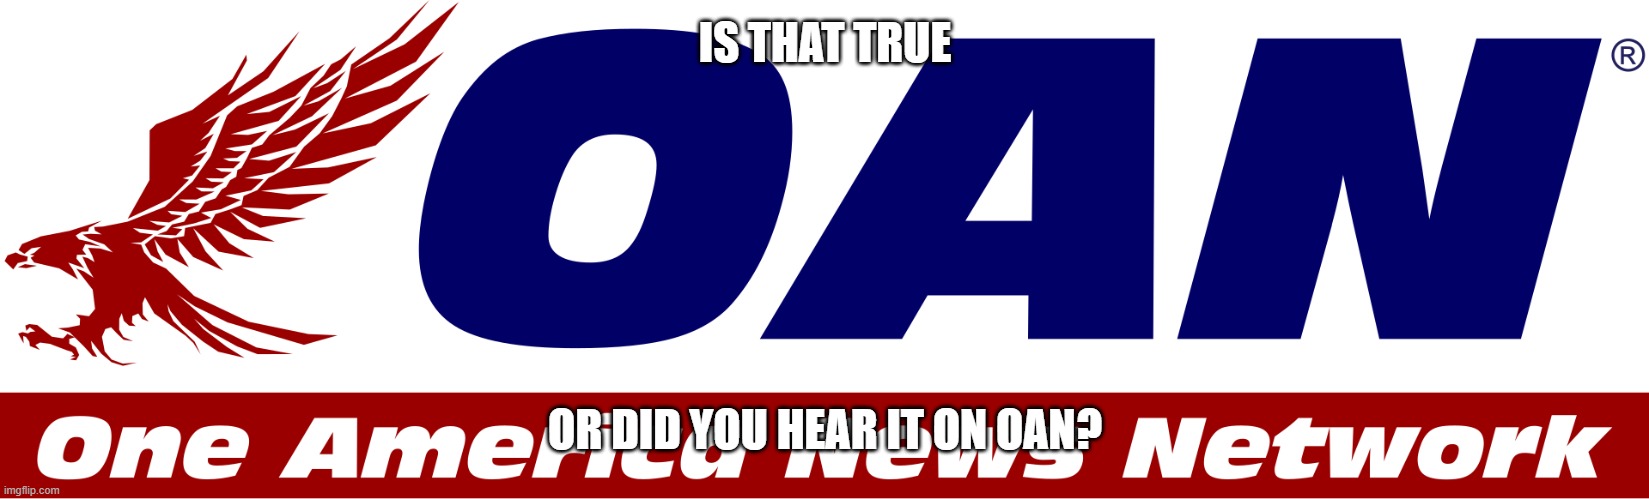 Used in comment | IS THAT TRUE OR DID YOU HEAR IT ON OAN? | image tagged in one america news logo,one america news,memes,funny,president_joe_biden,oan fake news | made w/ Imgflip meme maker